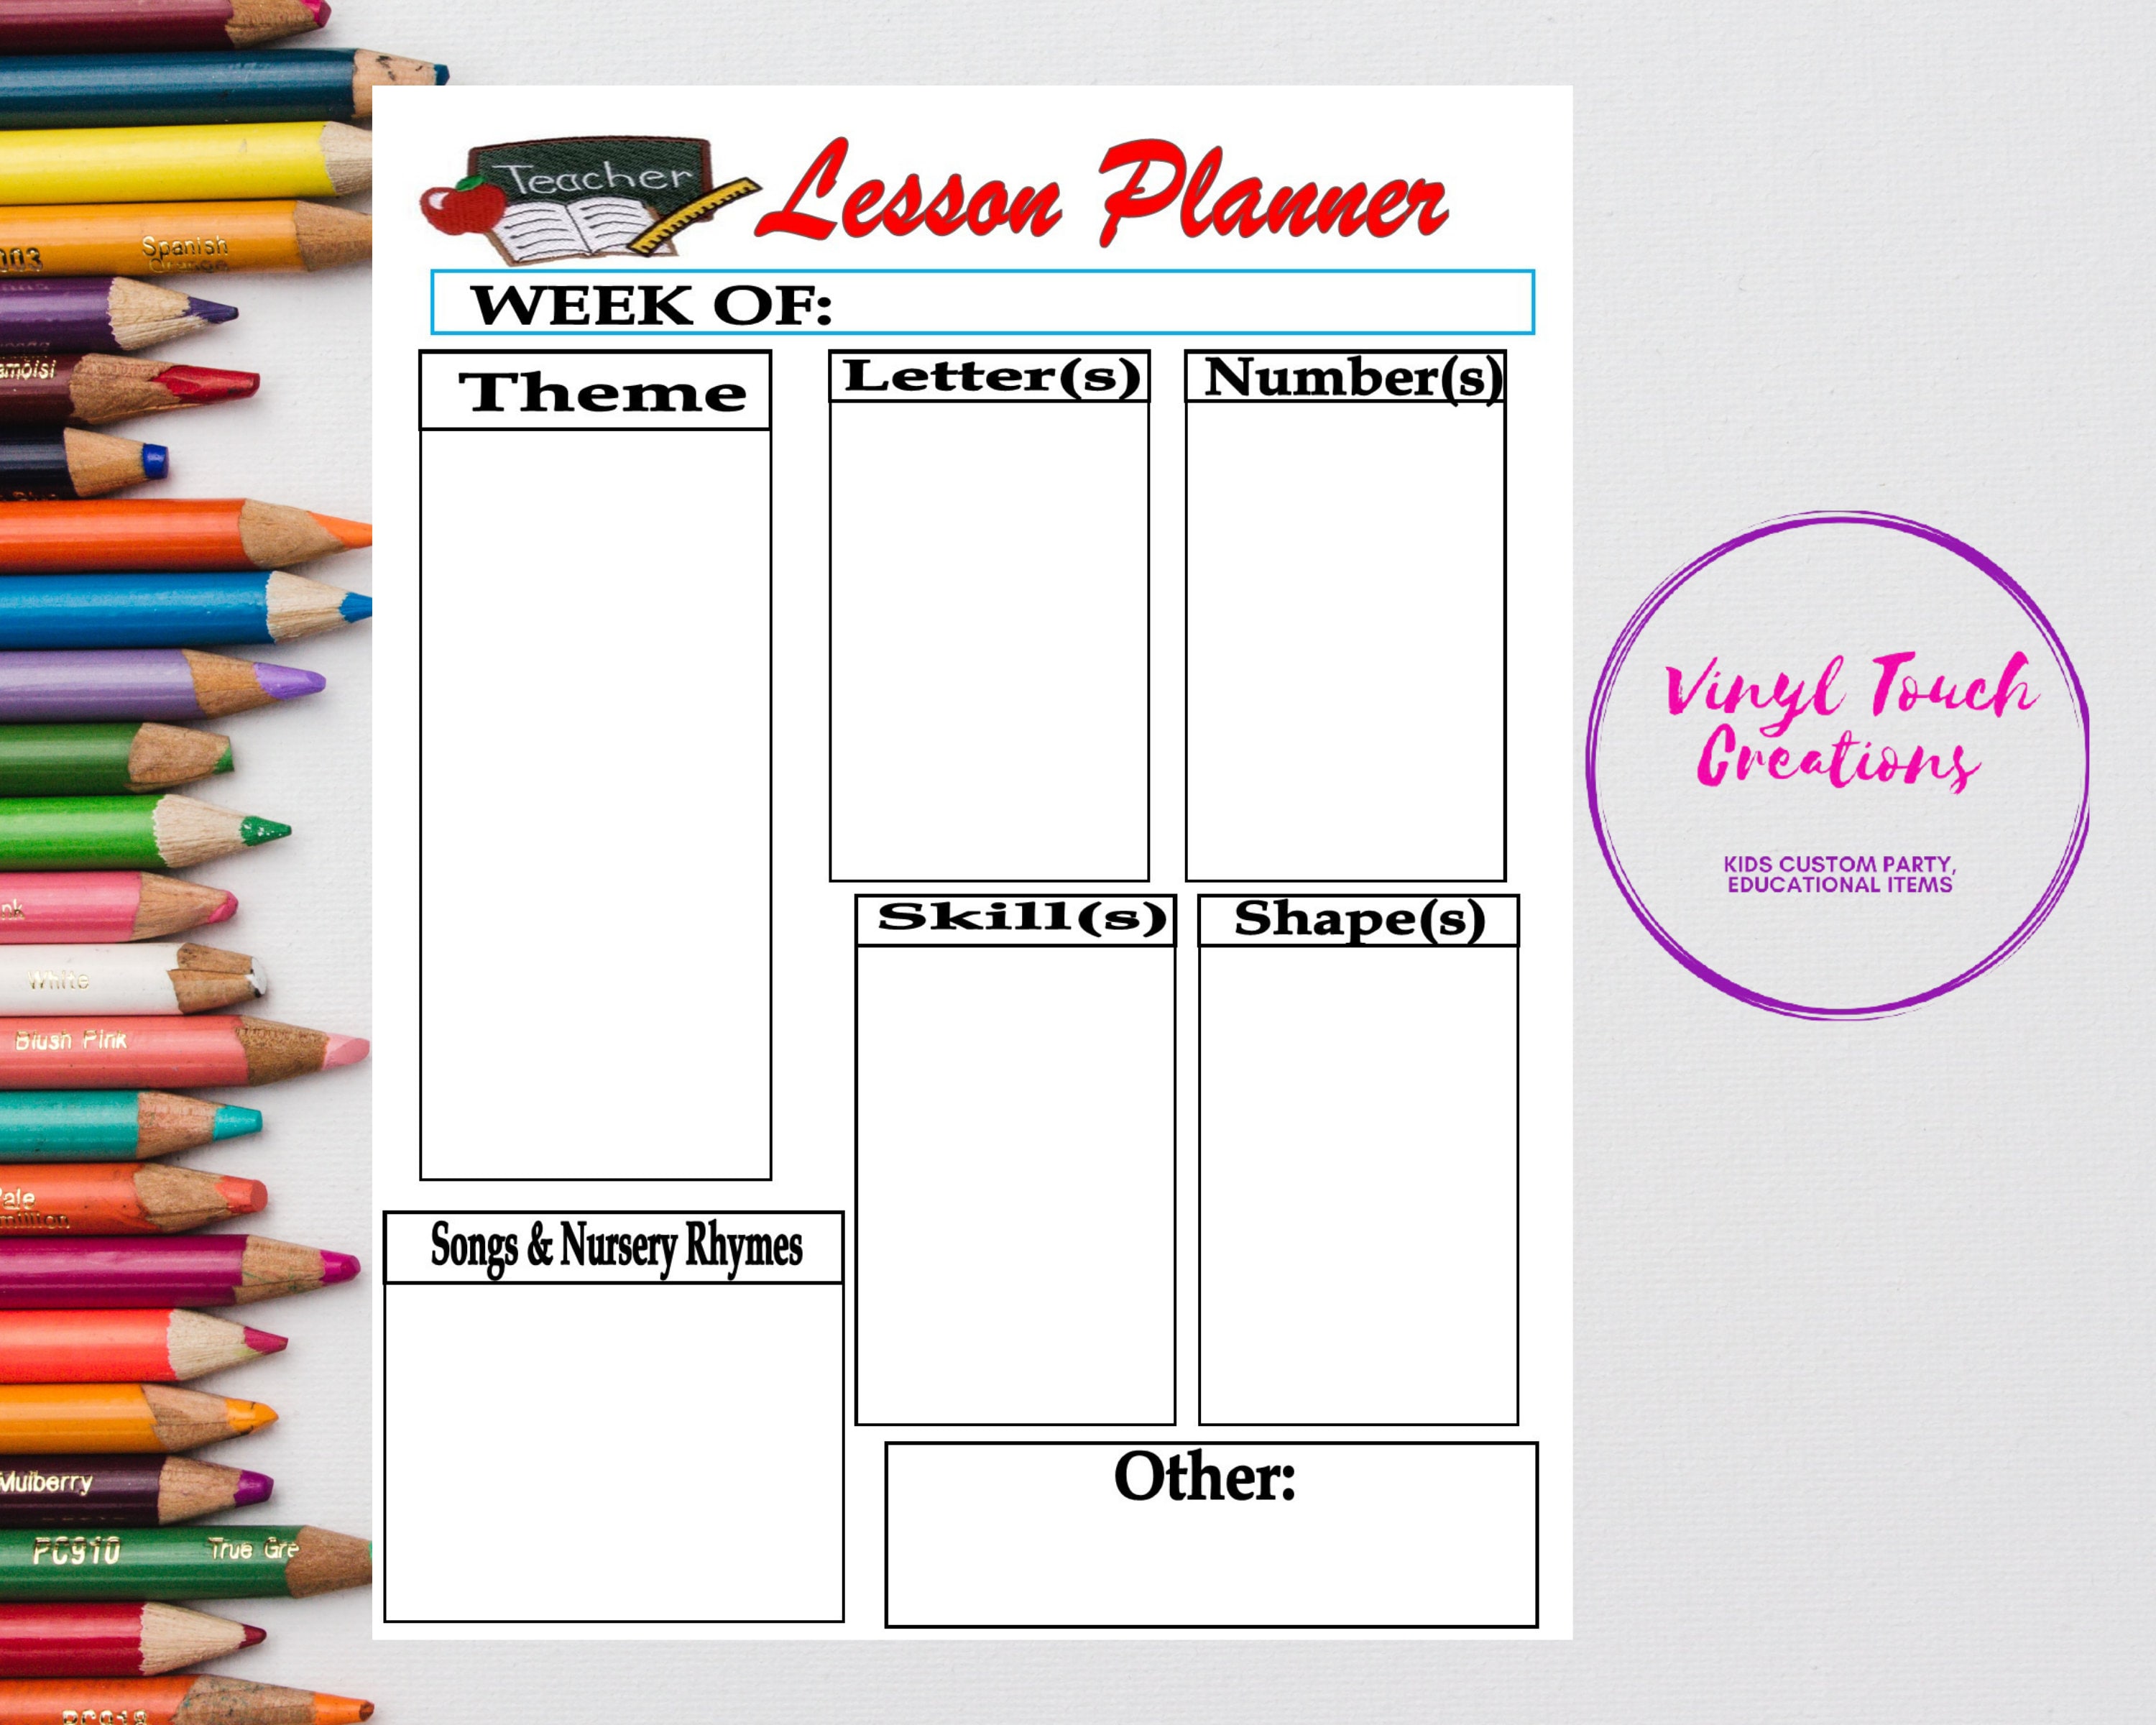 daycare-lesson-plan-template-weekly-teacher-lesson-plan-lesson-plan